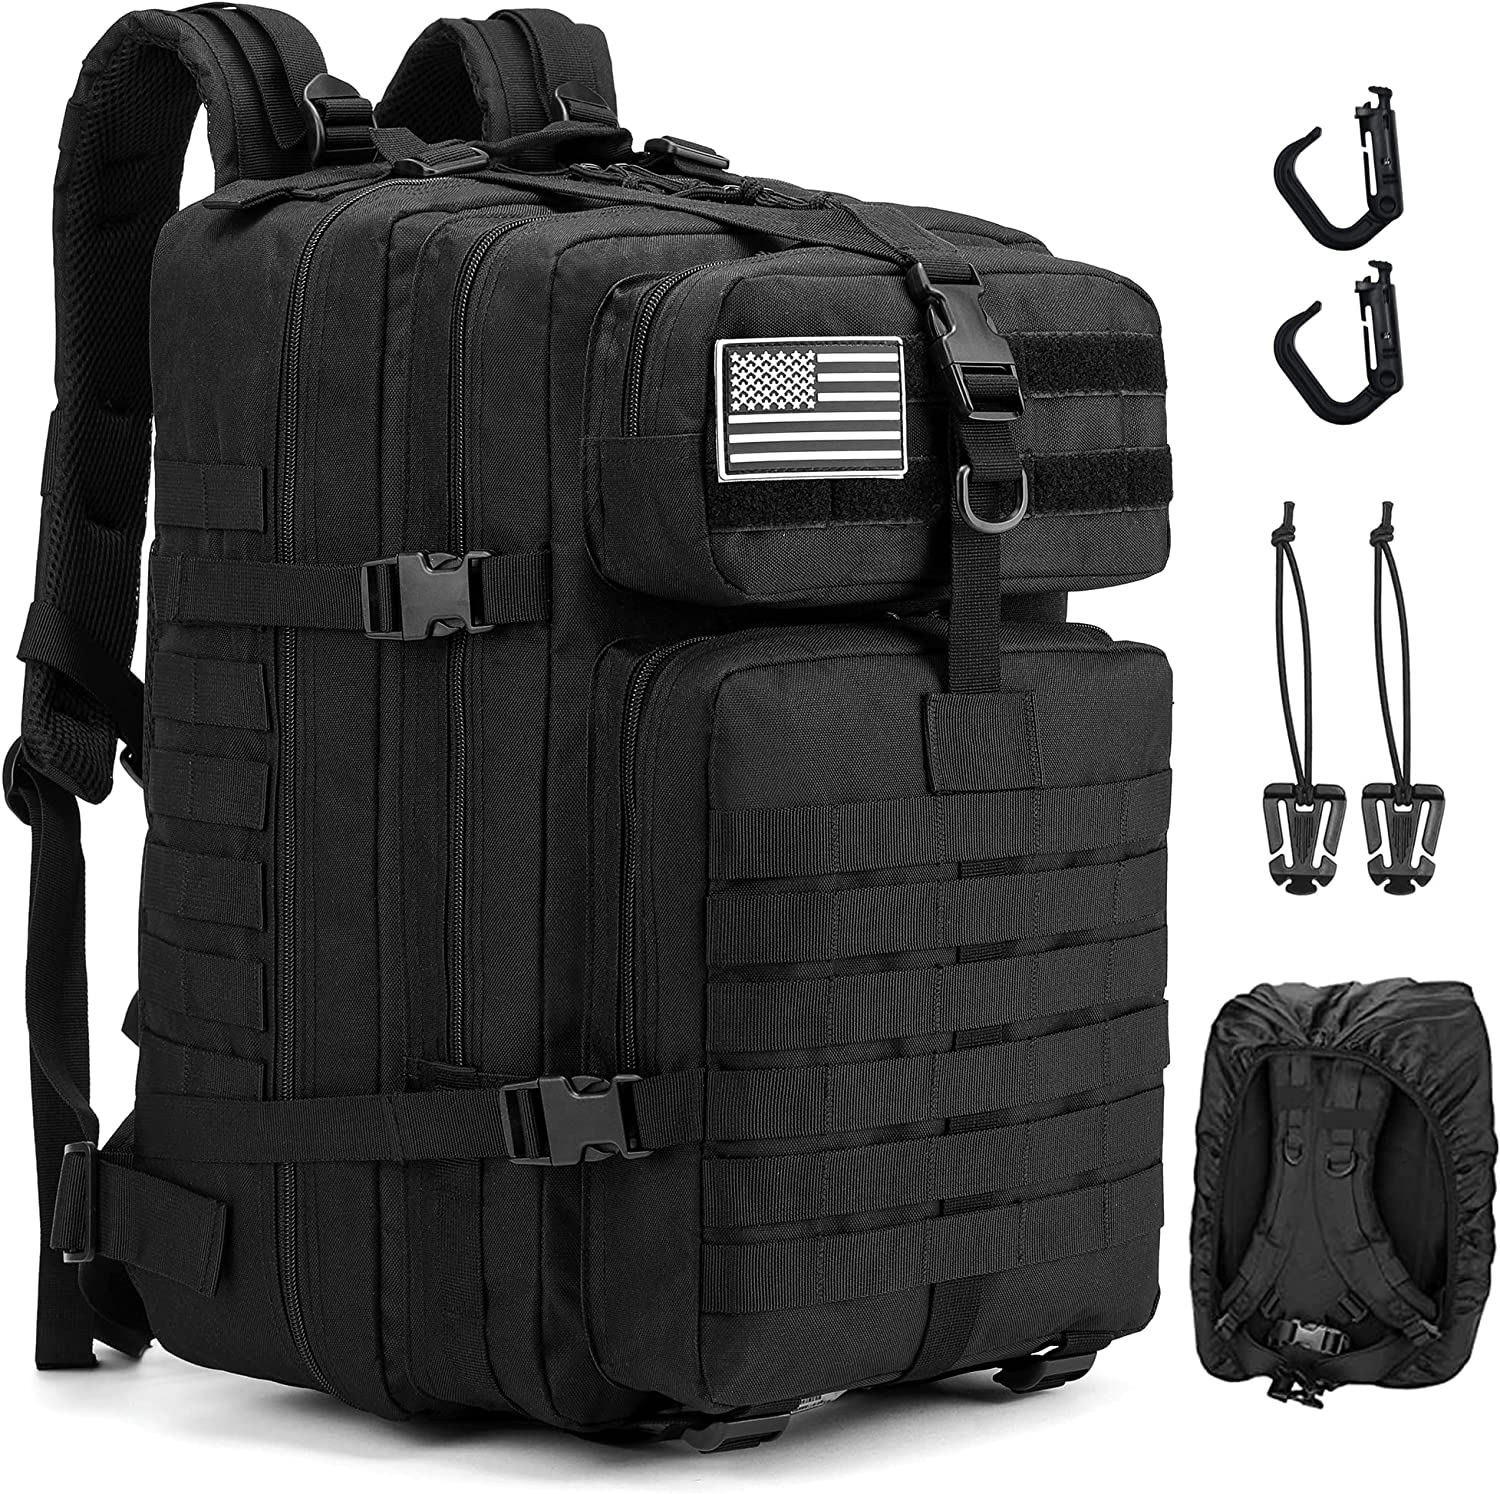 THYWD 45L Tactical Backpack Large Black Military Army Tactical Go Bug Out Bag Backpack 3 Day Assault Pack Molle Rucksack for Men And Women Outdoor Hiking Hunting Camping